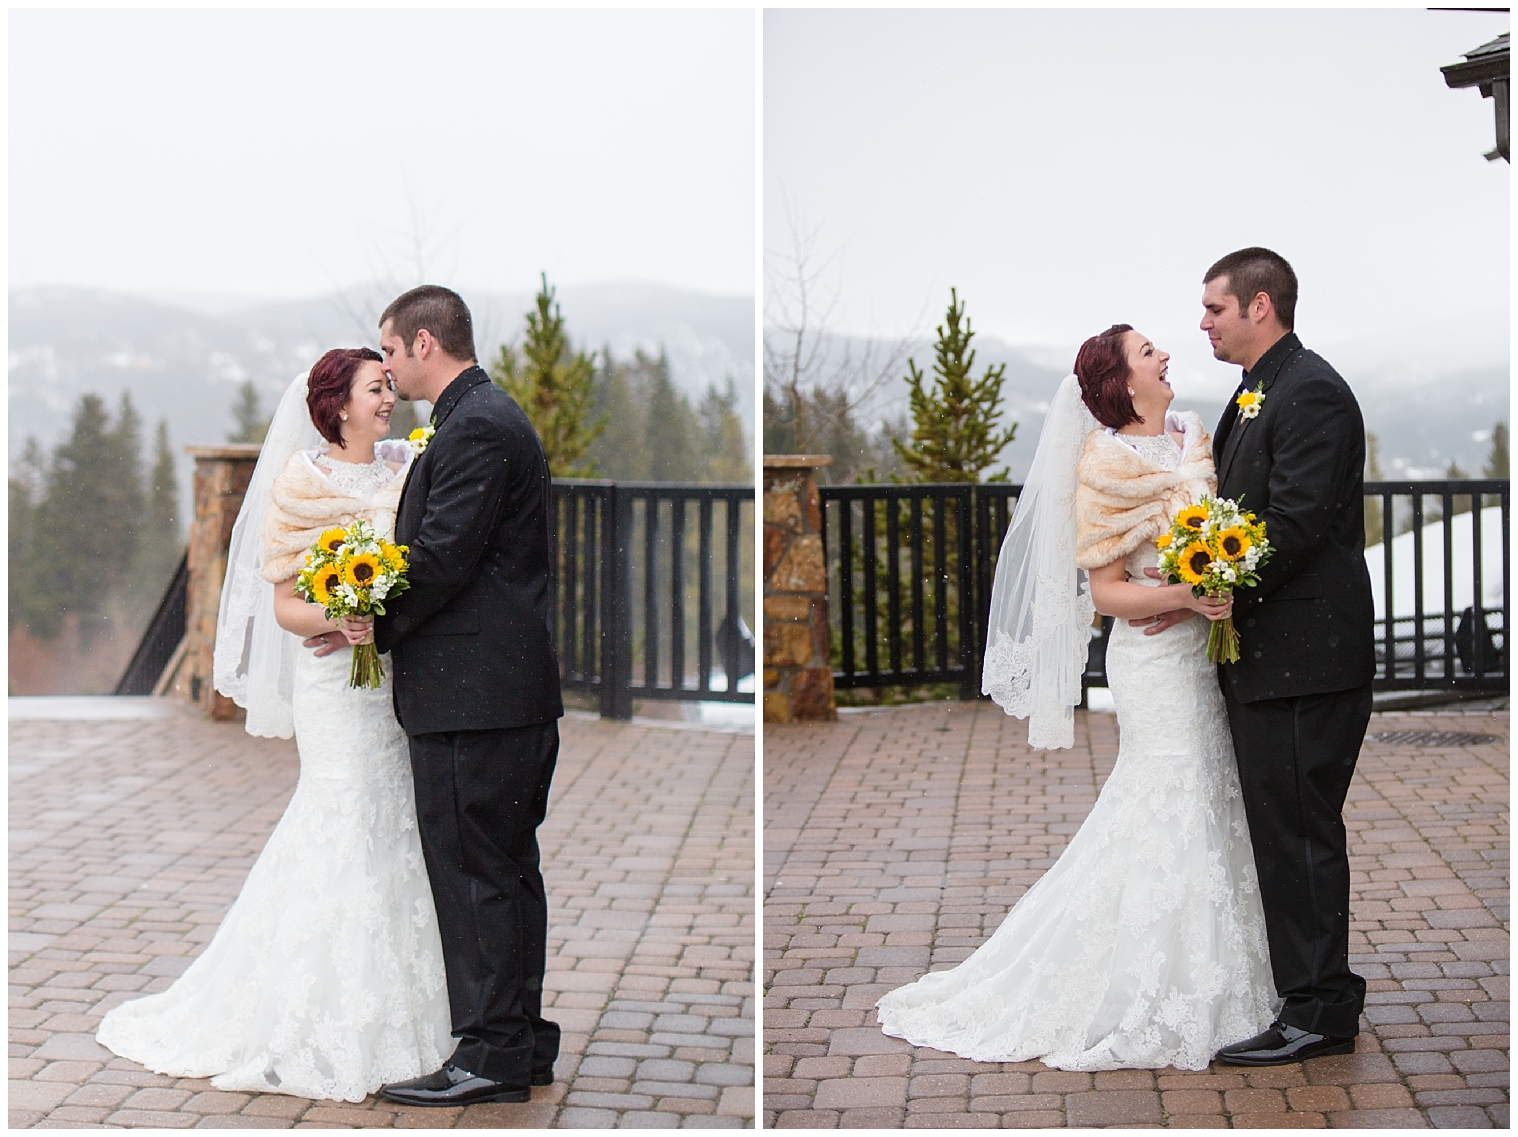 The bride and groom embrace after their Colorado mountain wedding ceremony.